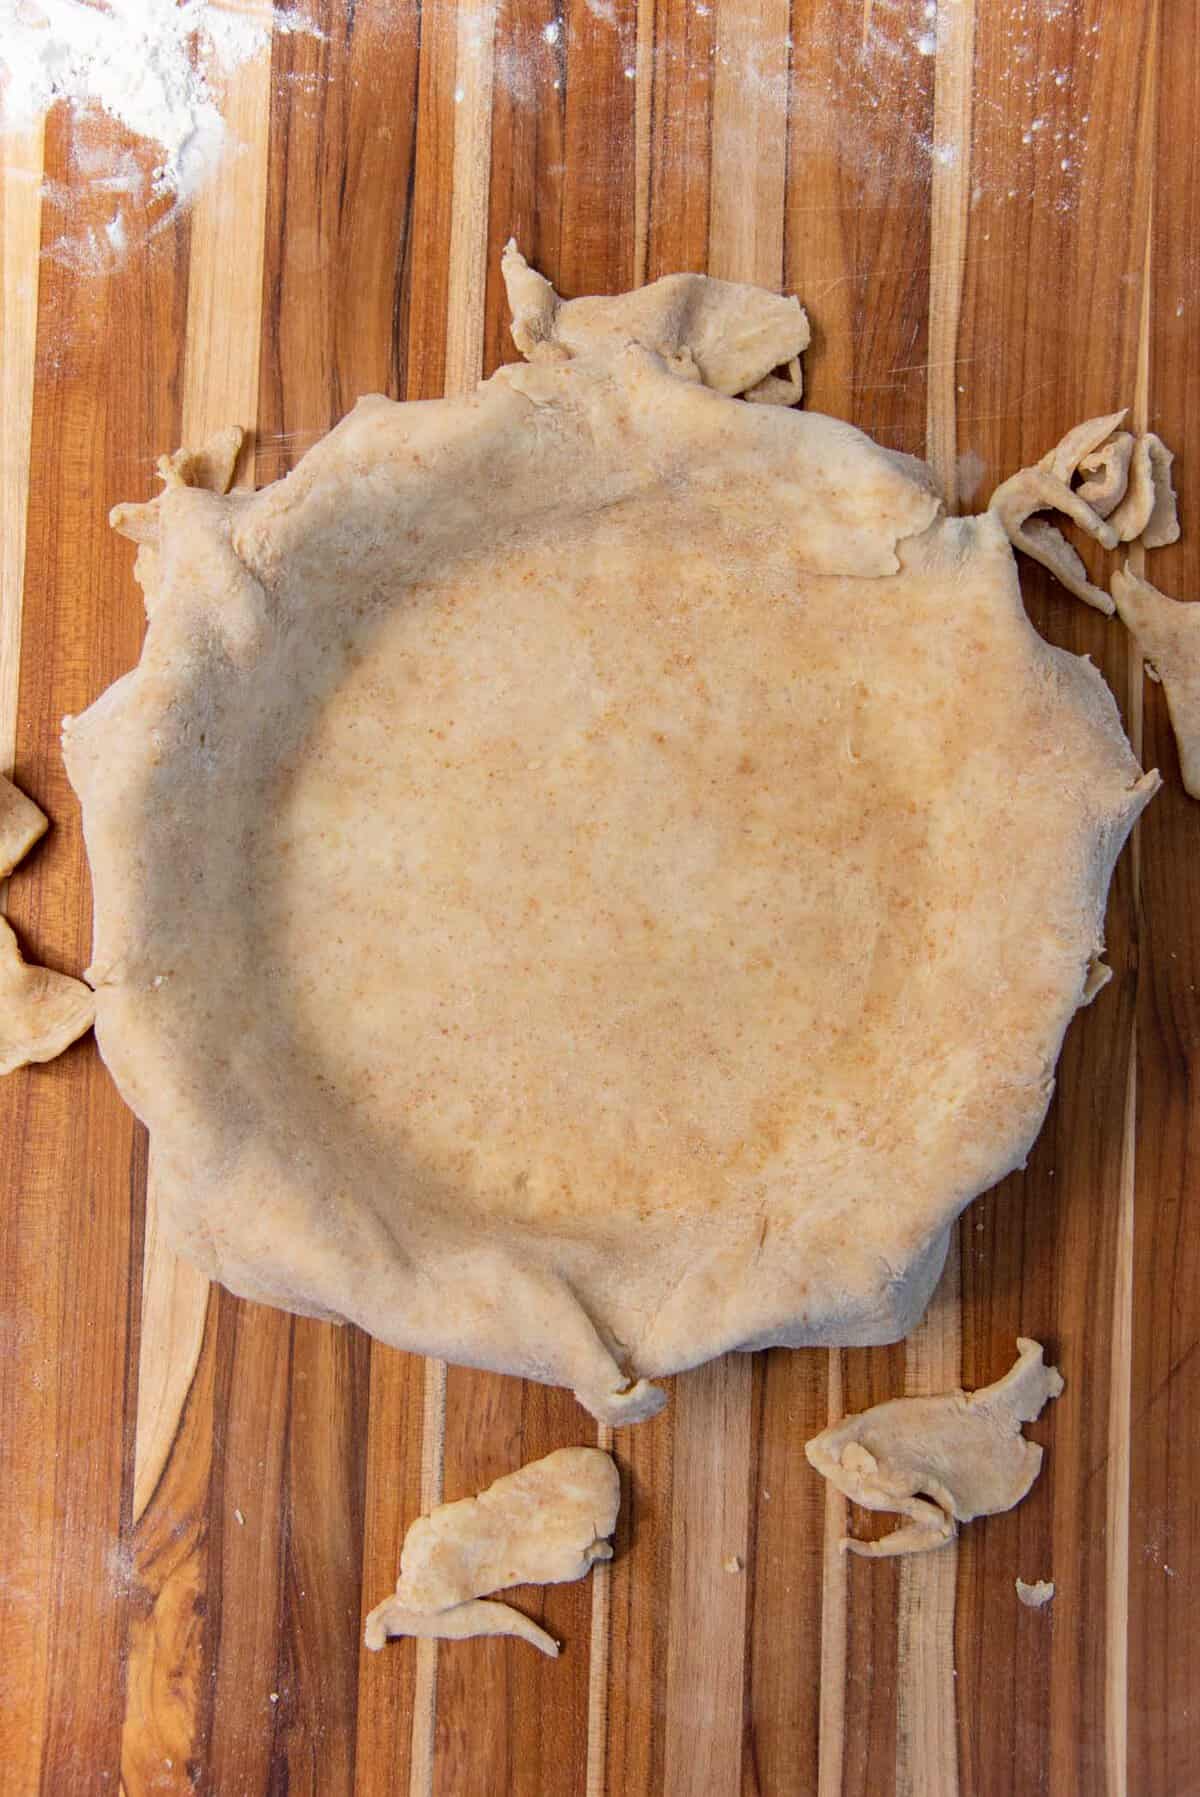 The edges of the pie crust trimmed inside a pie plate.